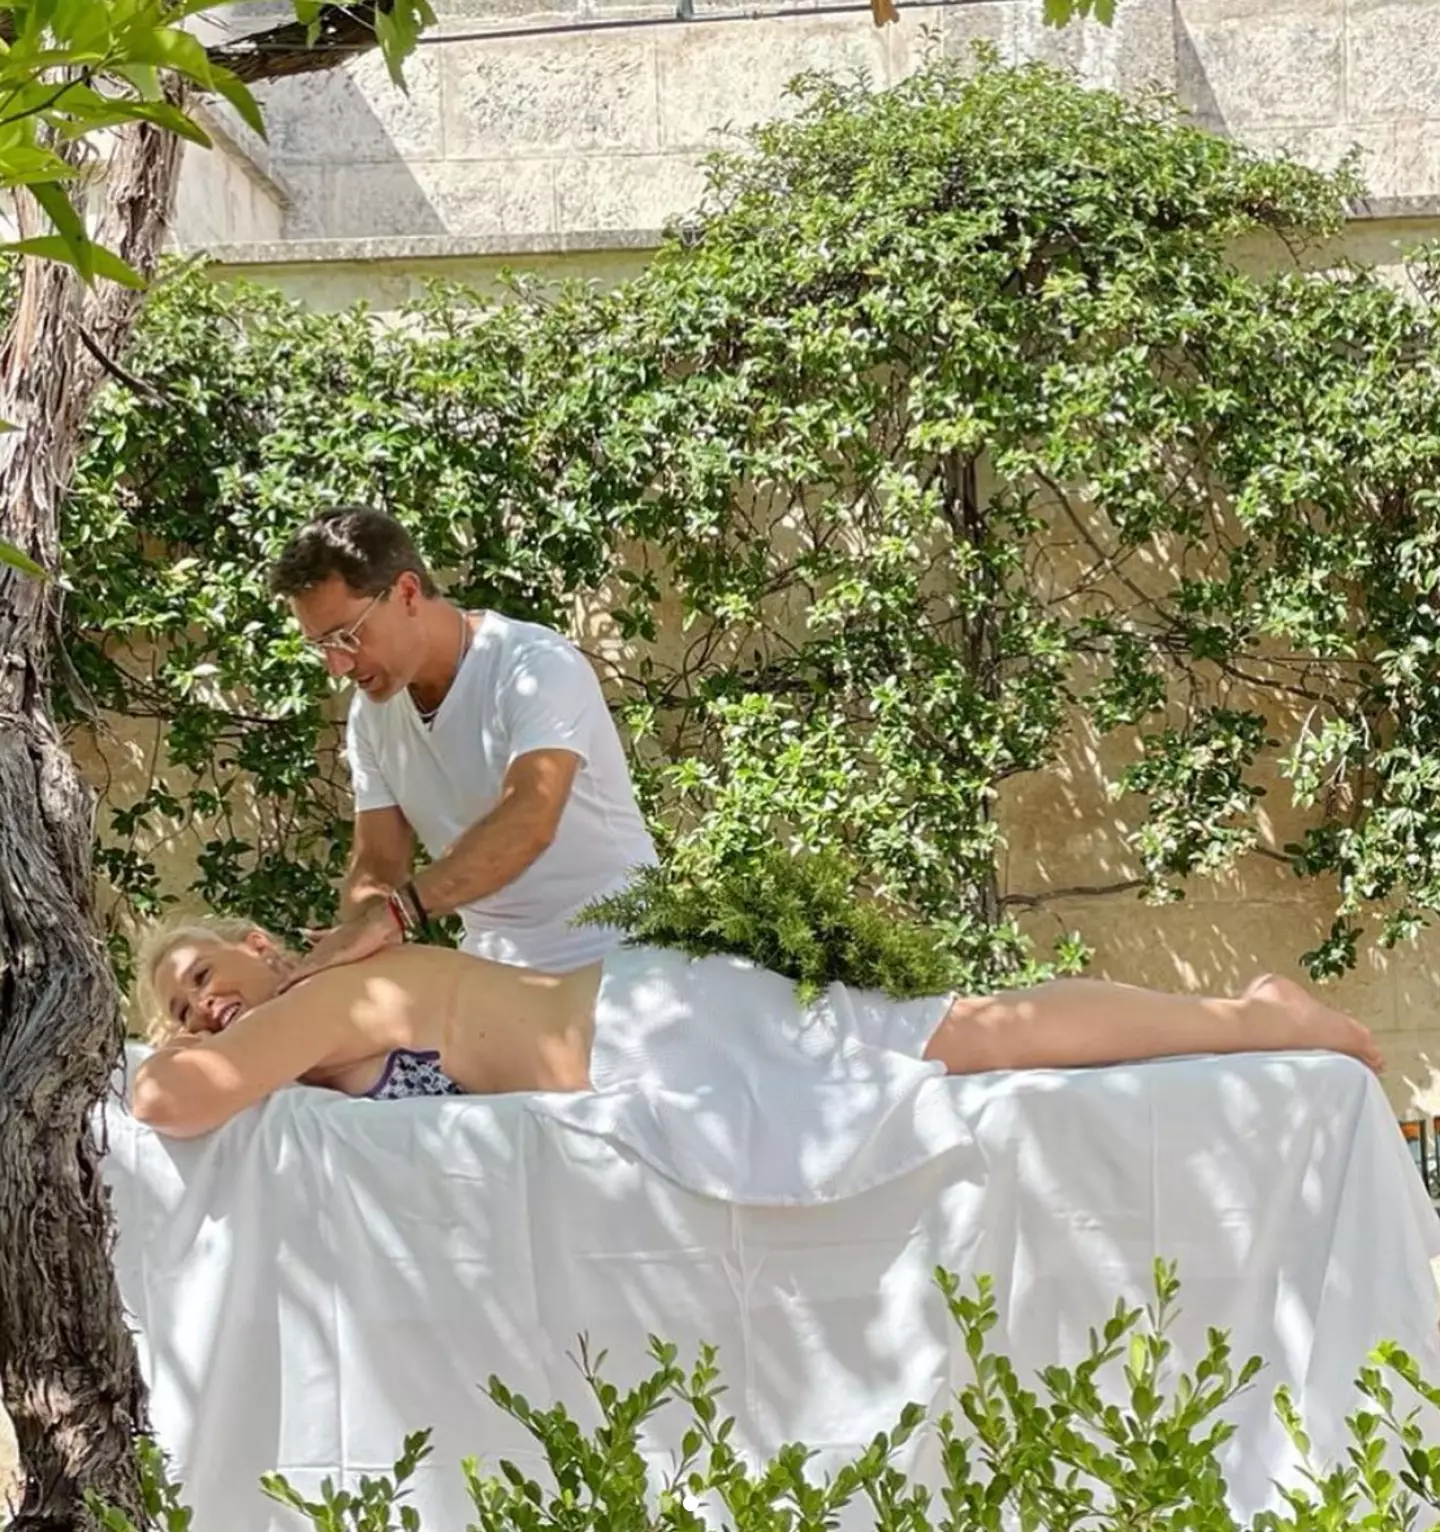 Gino D'Acampo gave is wife Jessica a massage (